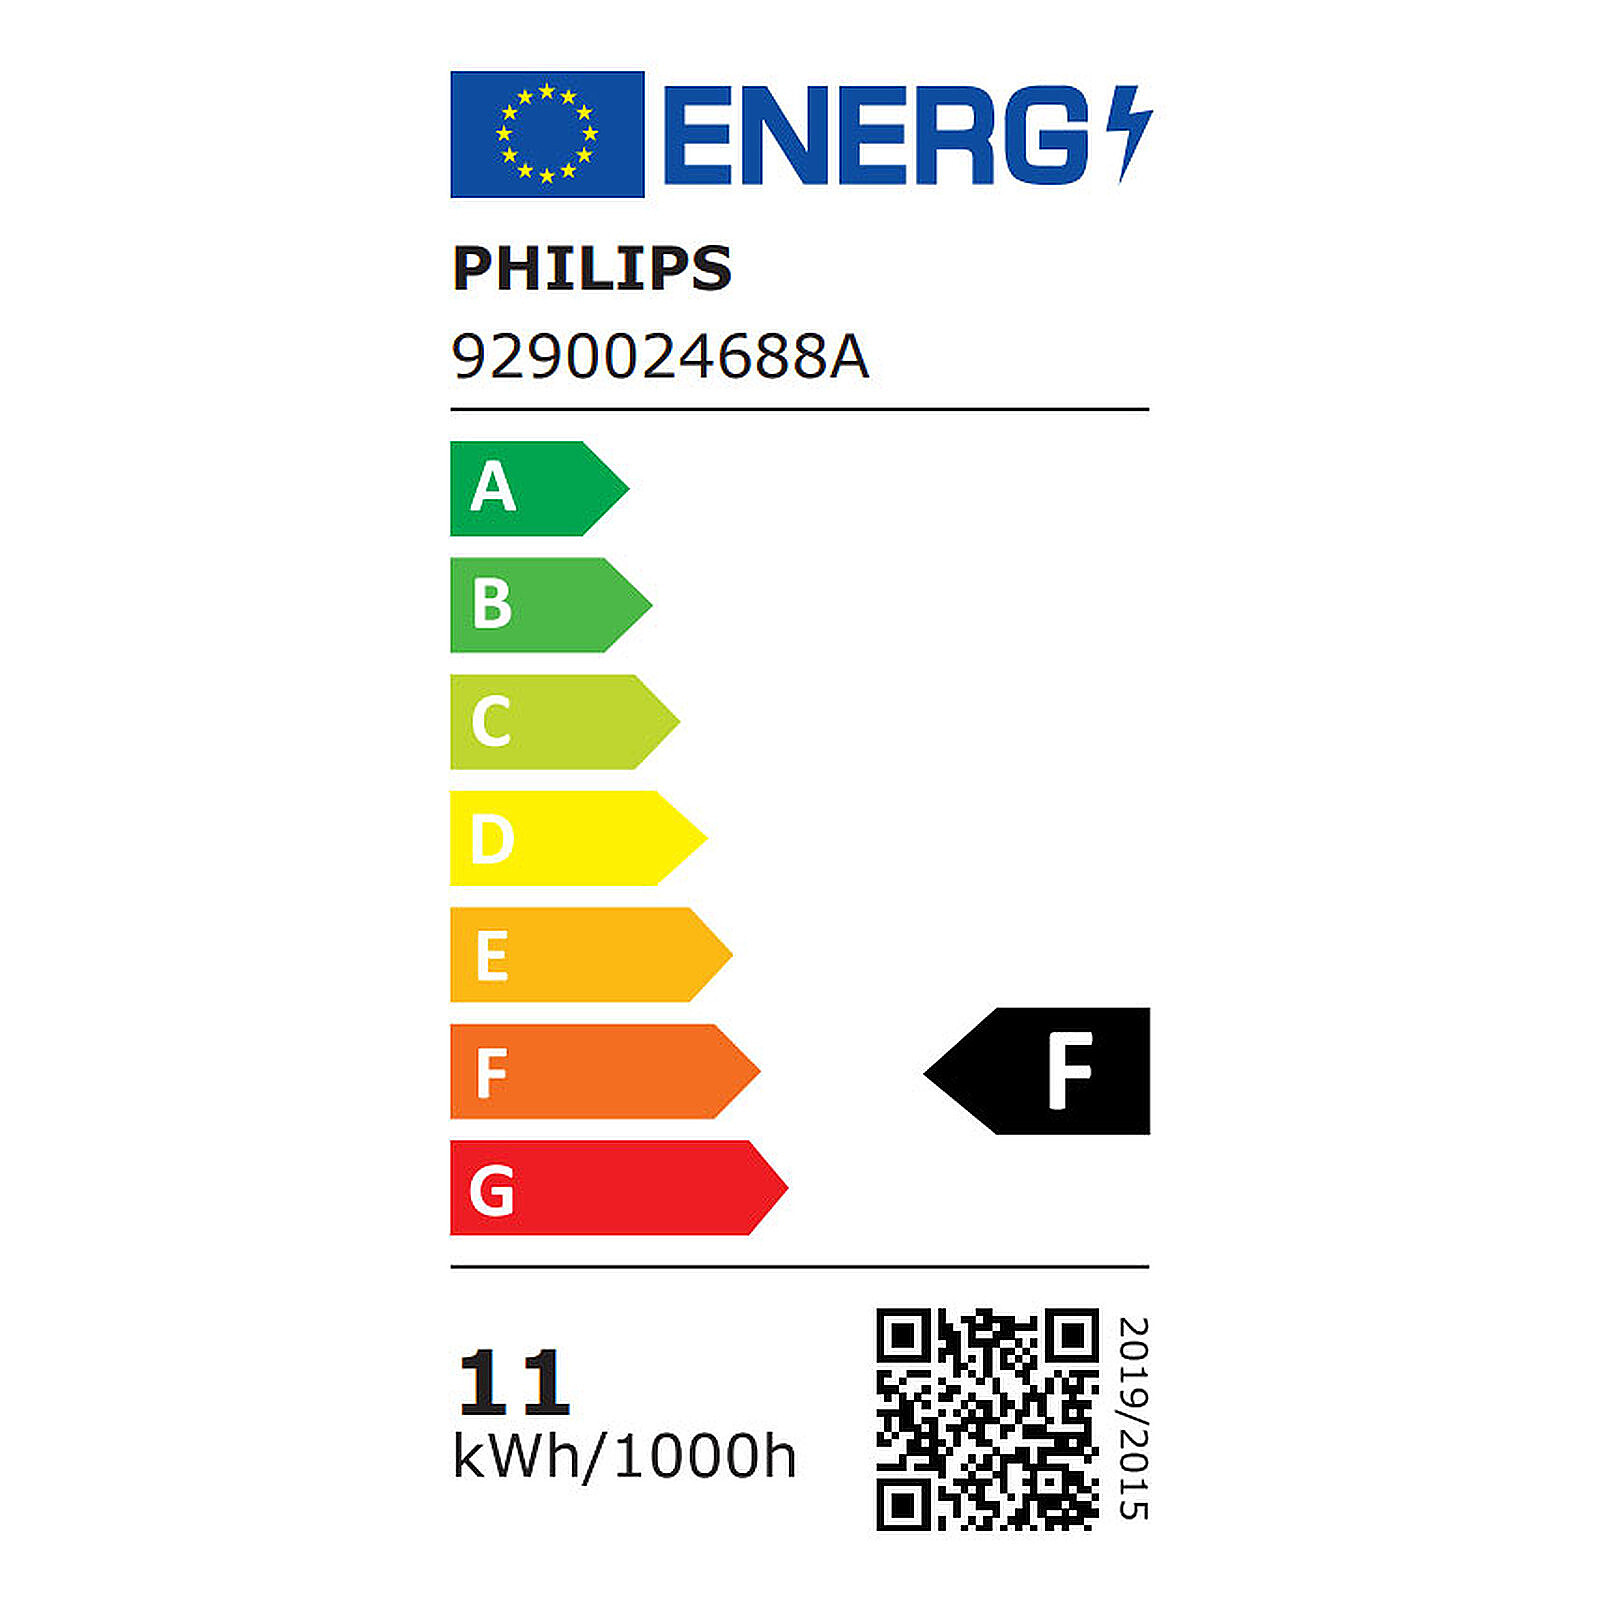 Pack 2 Bombillas Smart Hue LED E27 8w A60 White Ambiance - Philips